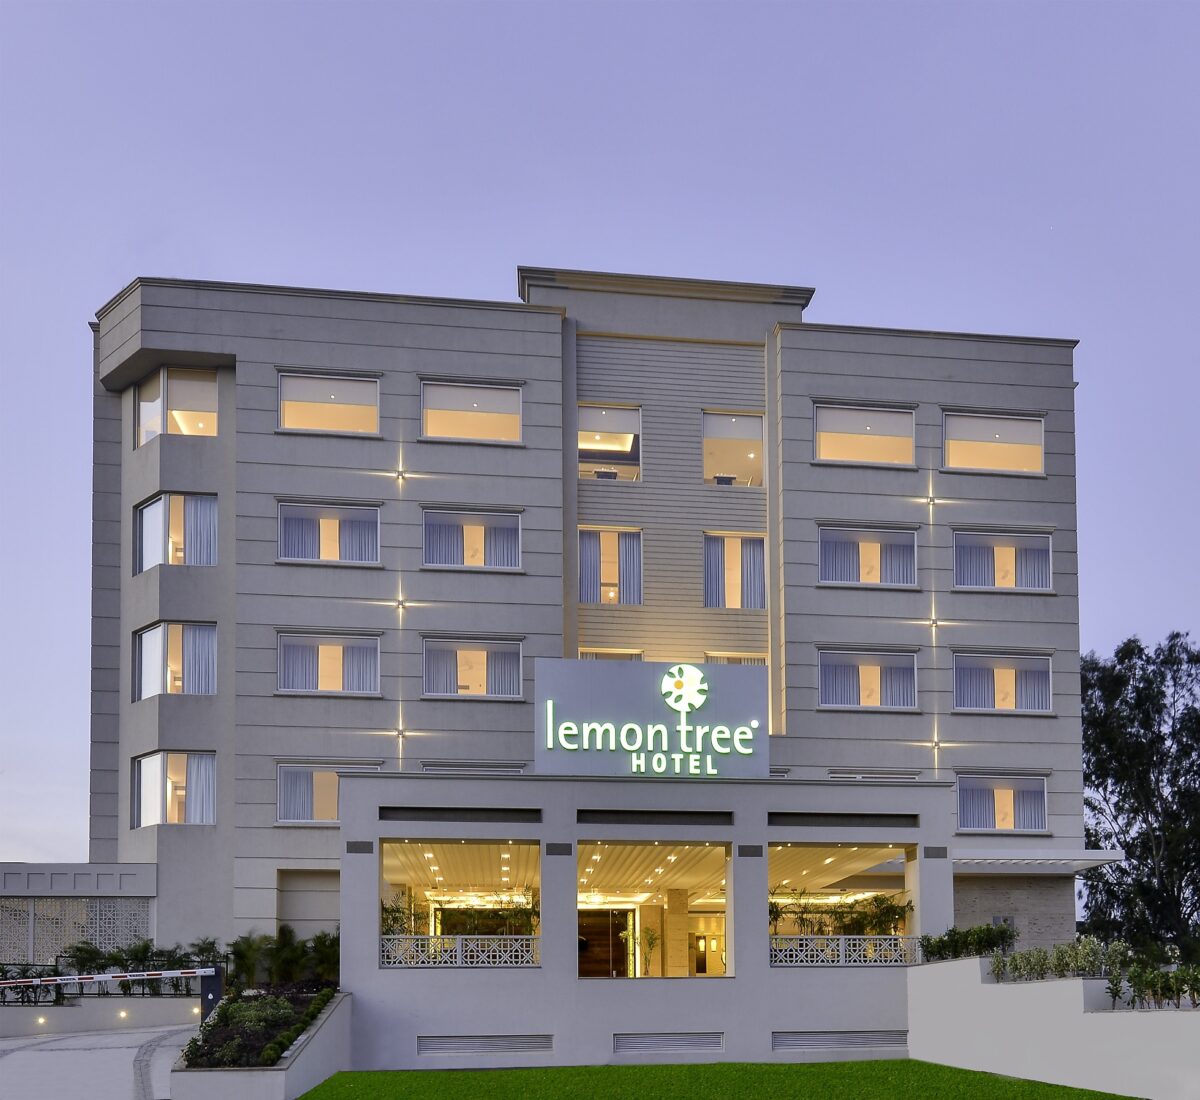 Lemon Tree Hotels surges 9% to record high on strong earnings expectations